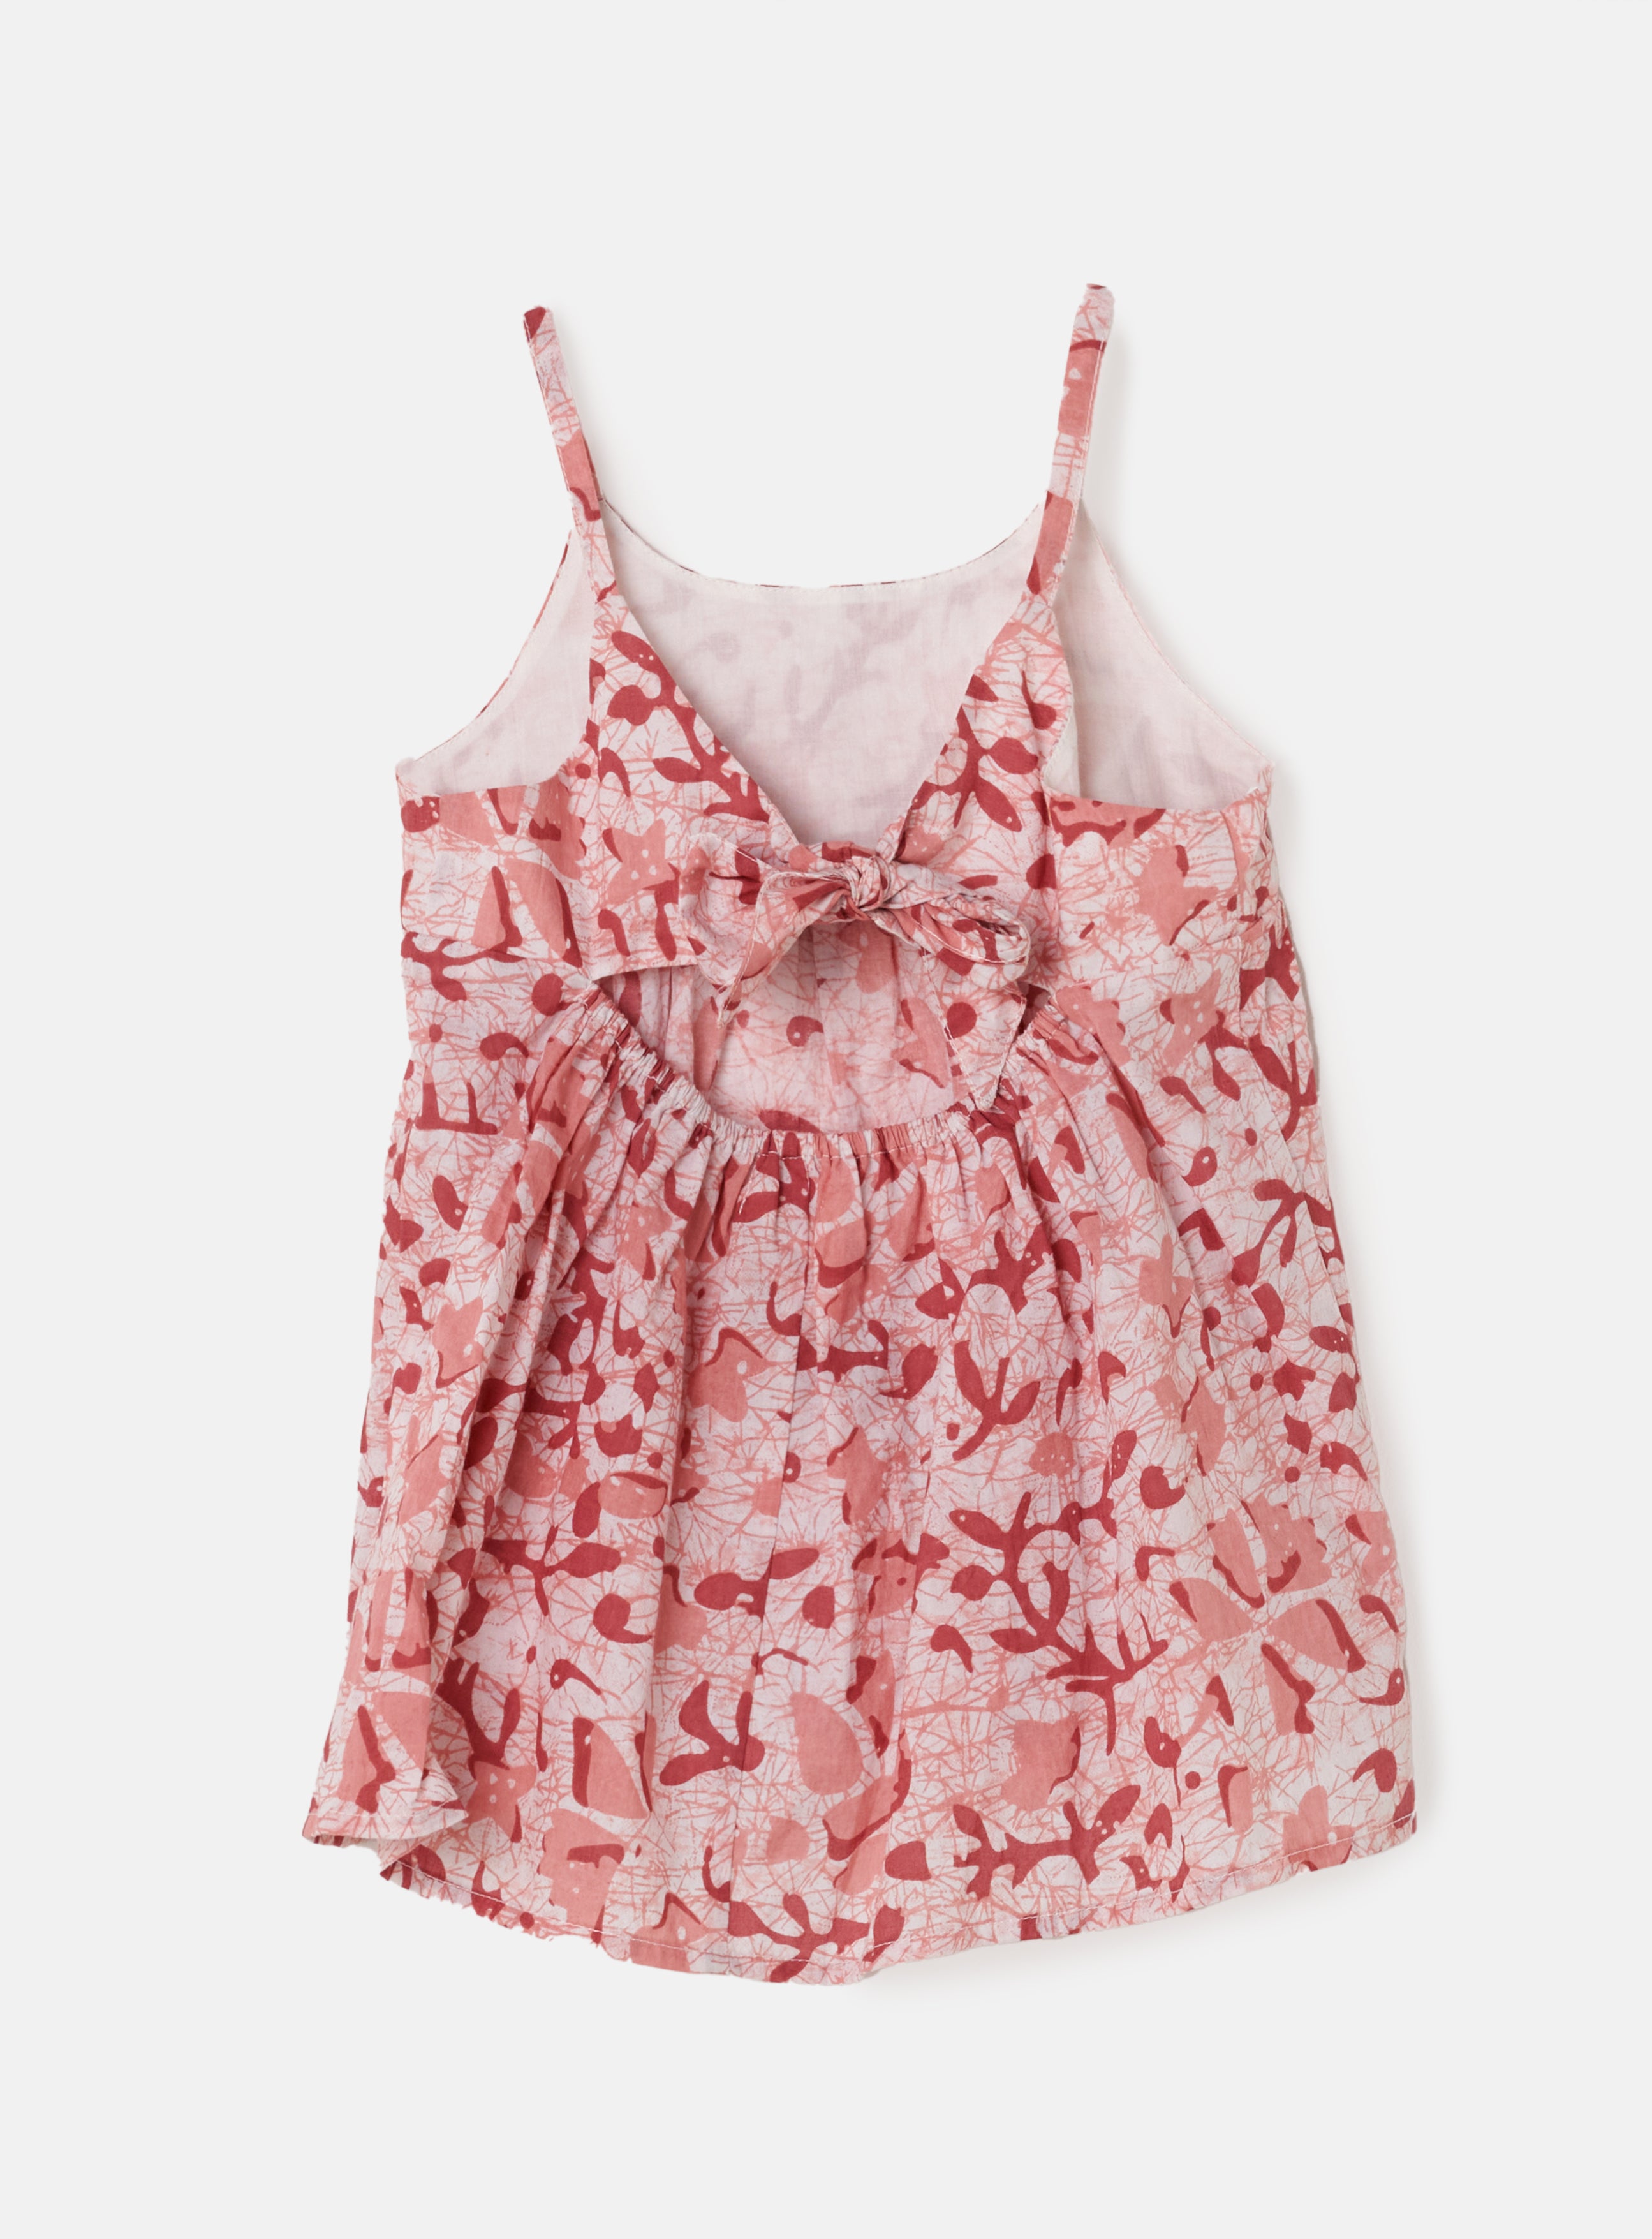 Girls Floral Printed Pink Top with Back Tie